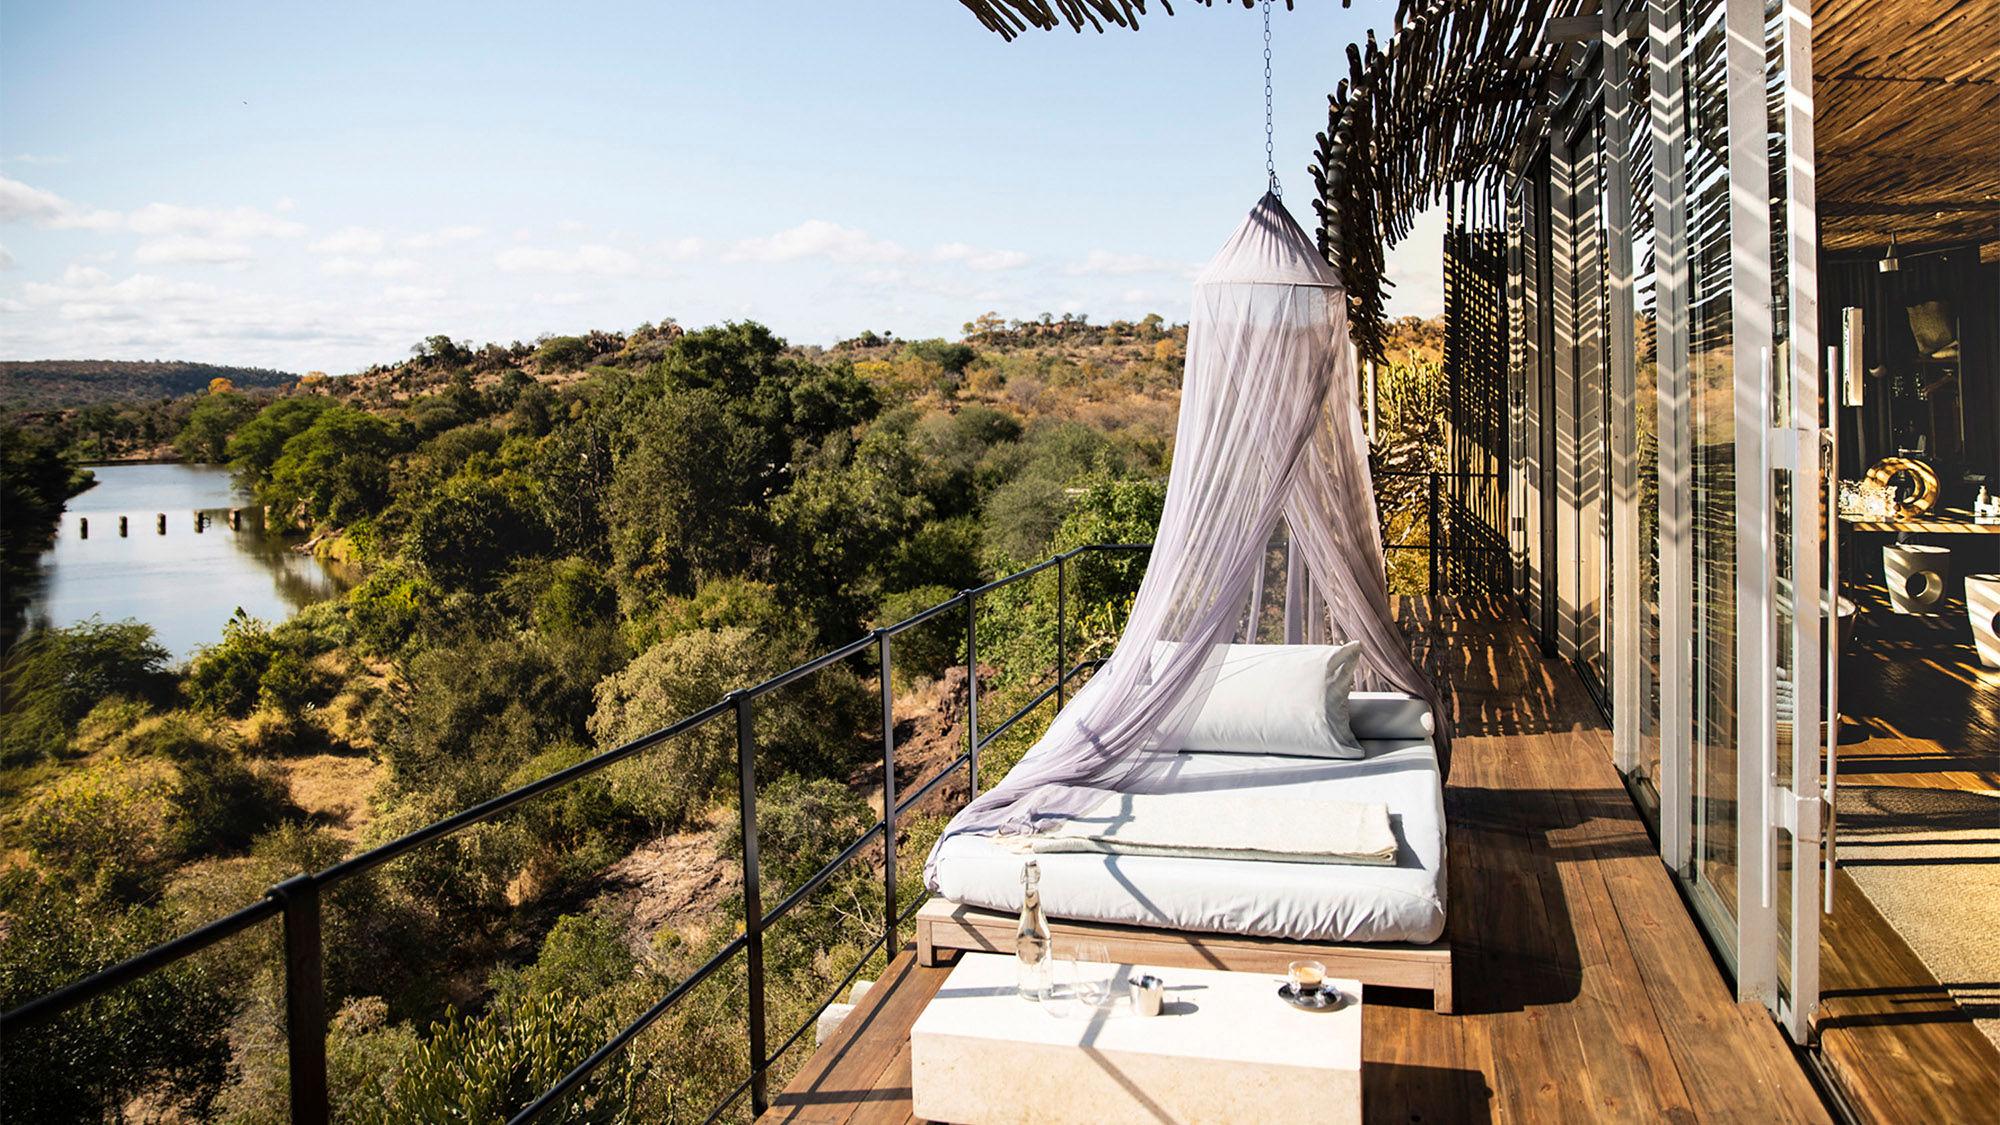 Guests at the Singita Lebombo can opt for sleeping arrangements outdoors, along with a few sleep rituals to welcome restorative sleep.